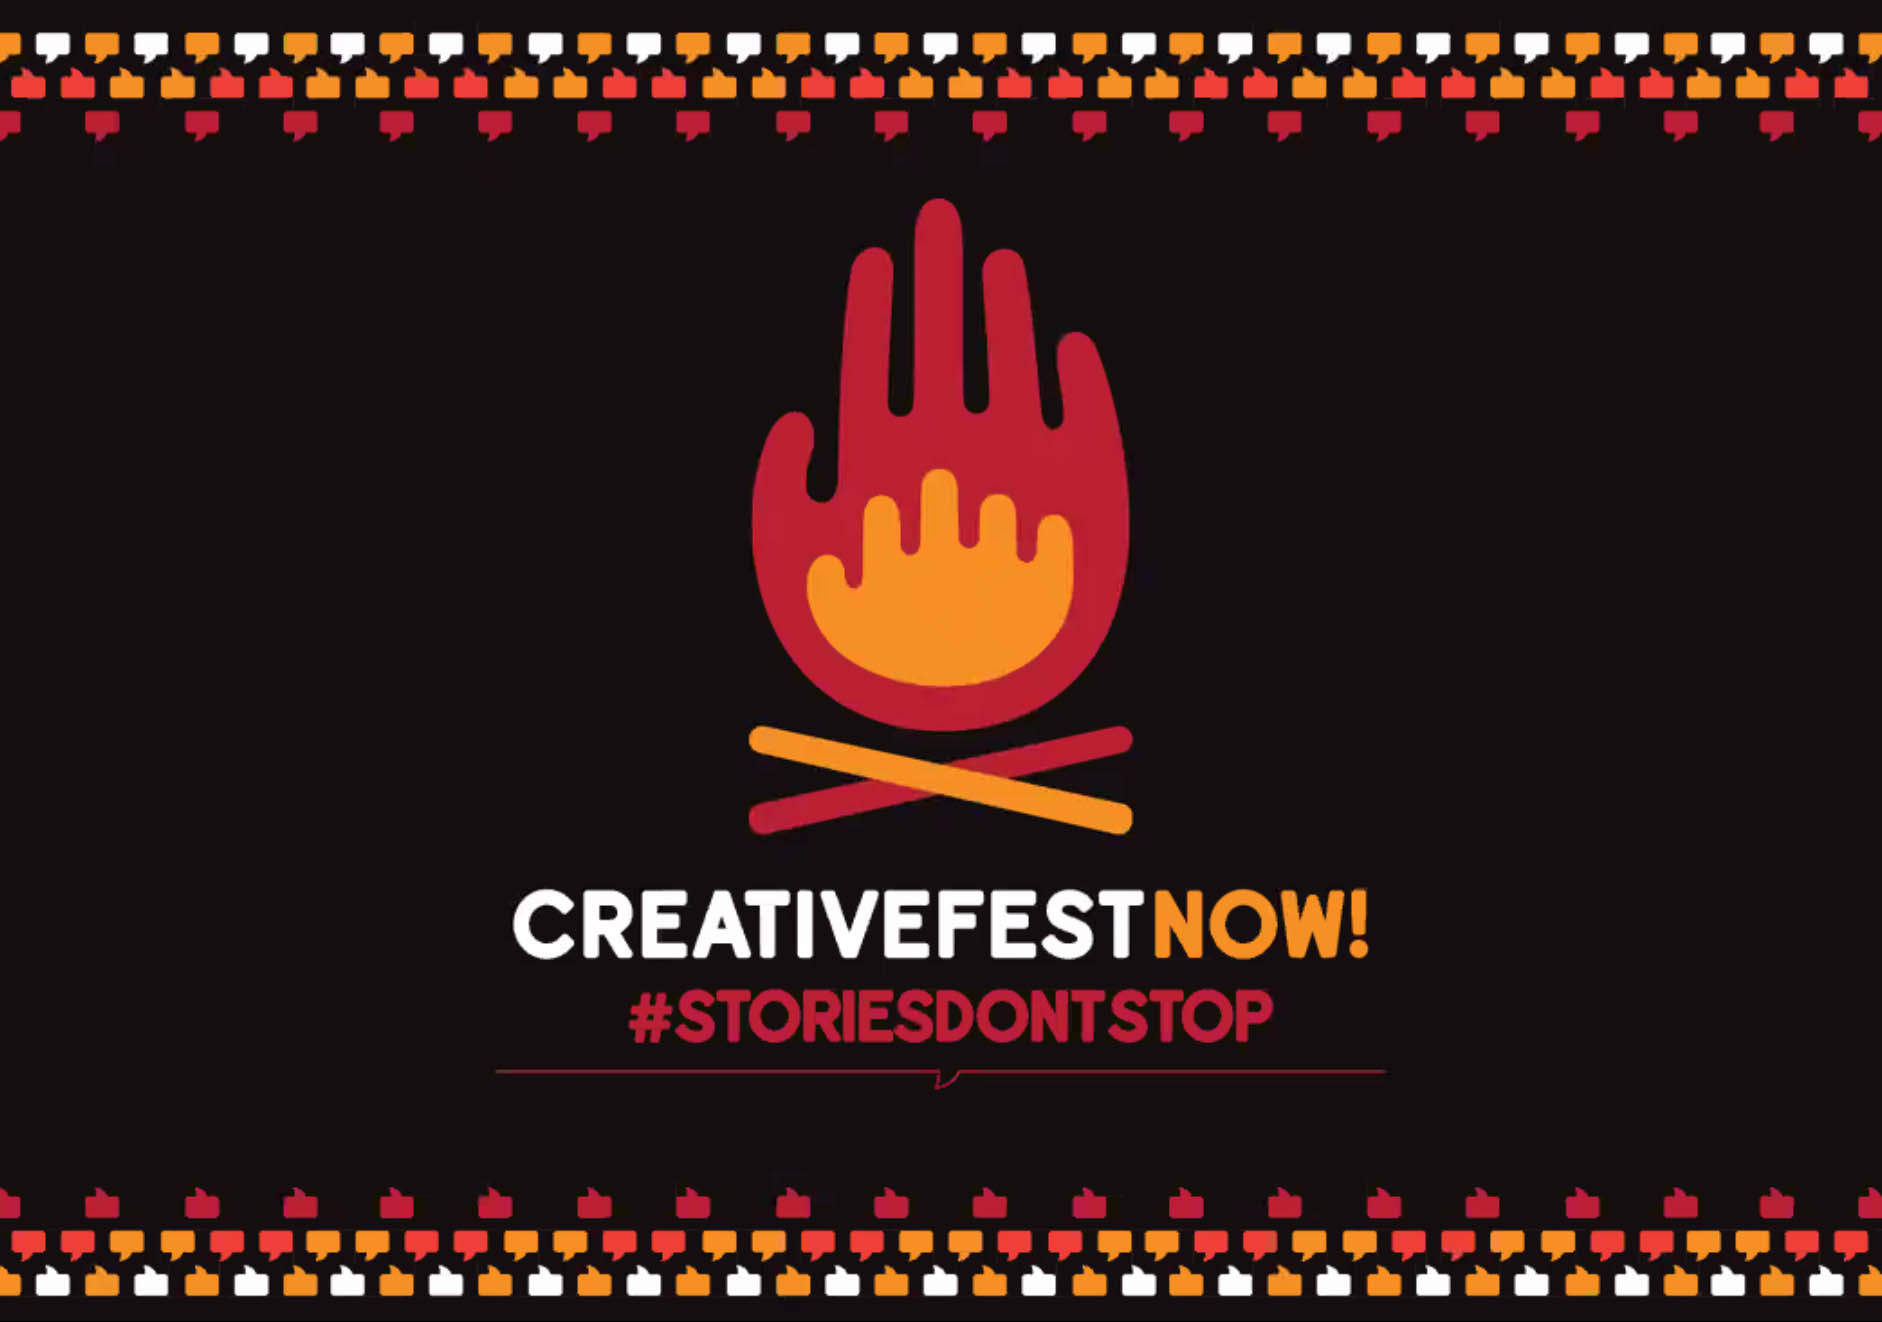 CreativeFest NOW! gathers top creative professionals goes digital for free on November 19-21